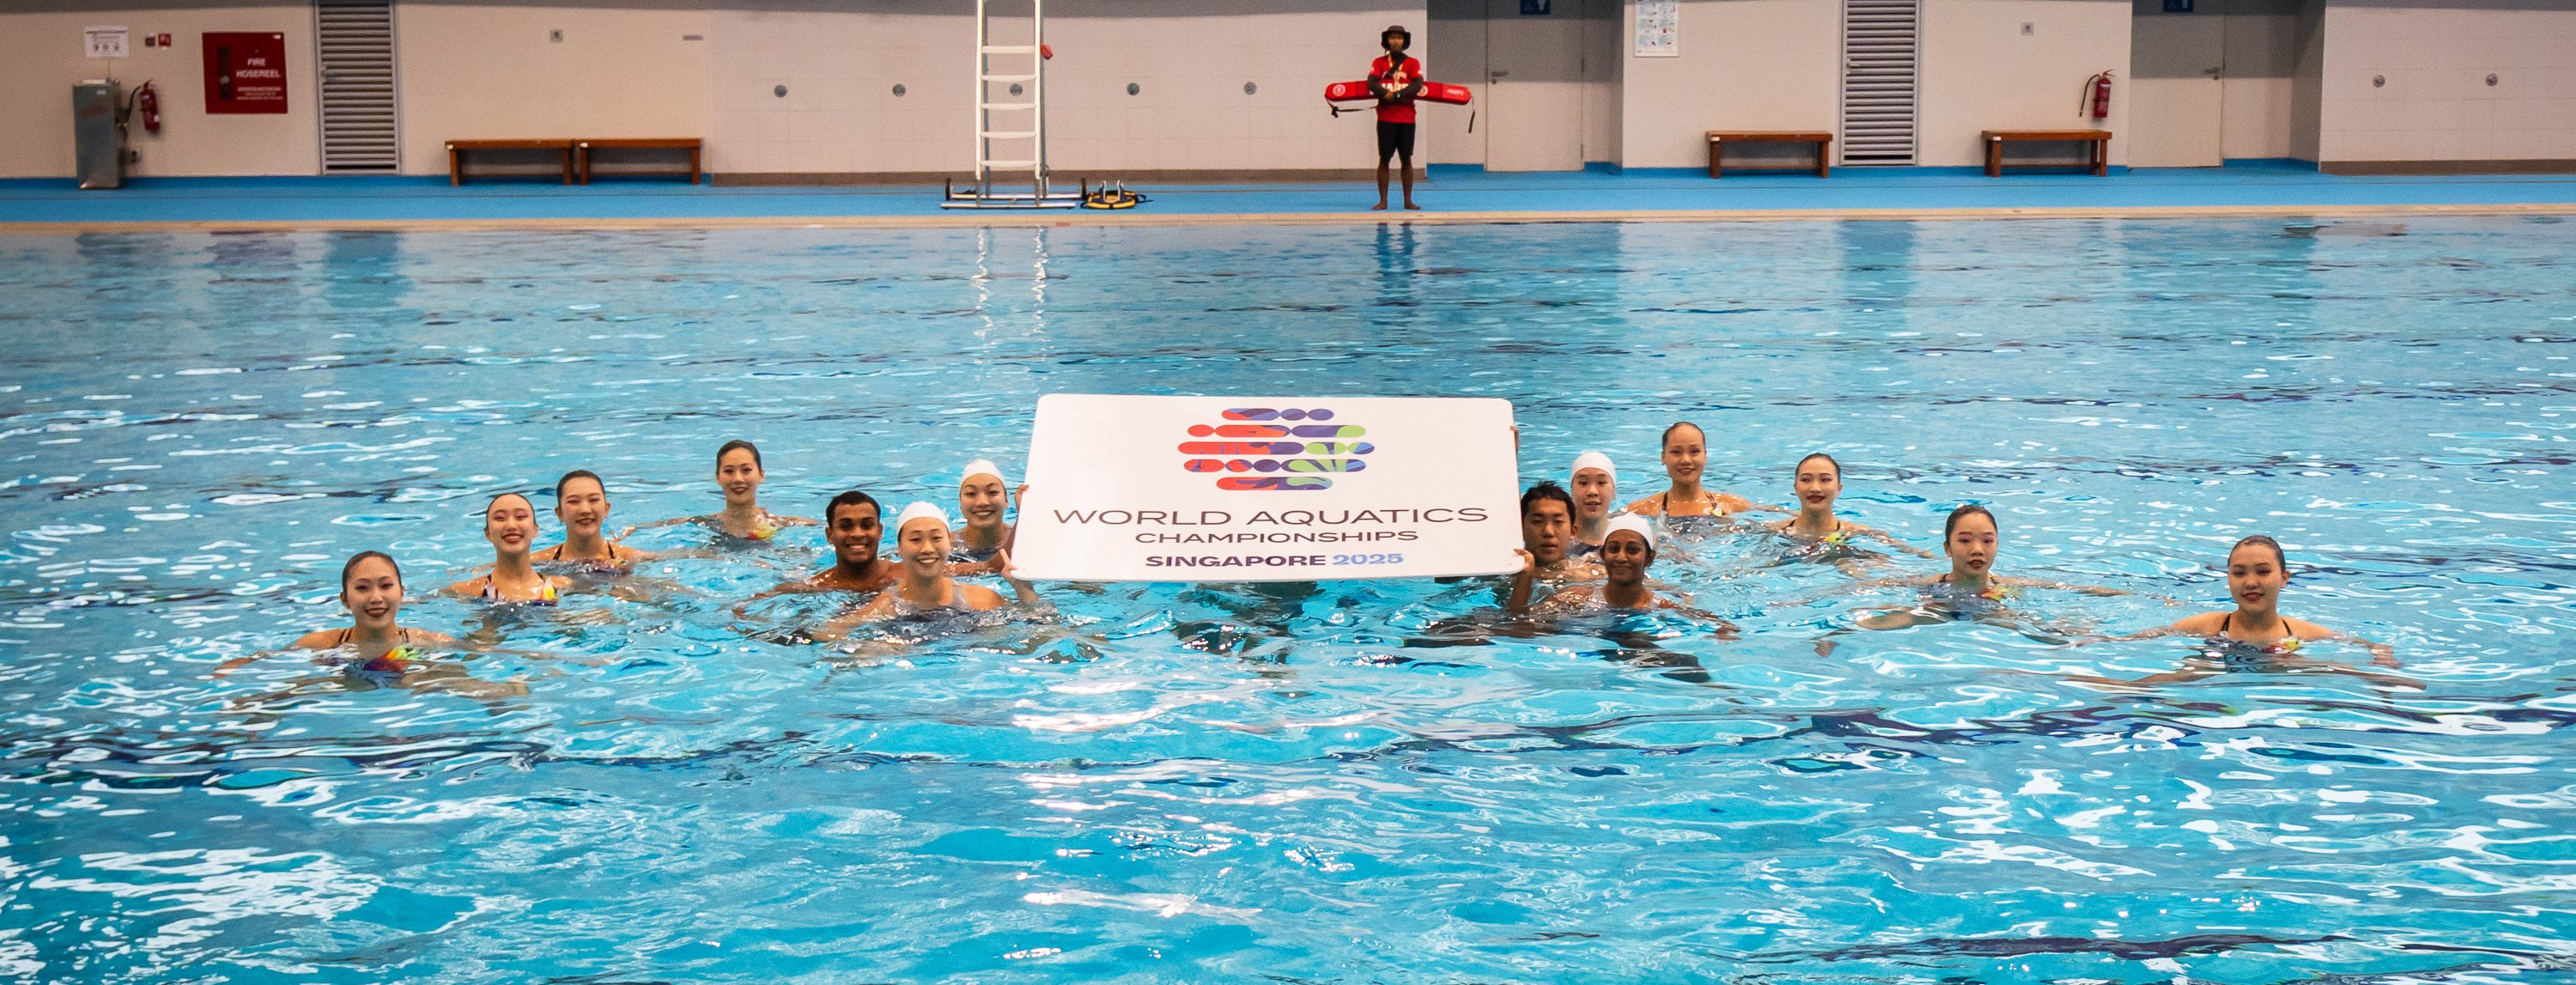 More than 2,500 athletes are expected to compete at the 2025 World Aquatics Championship in Singapore. Photo: Handout